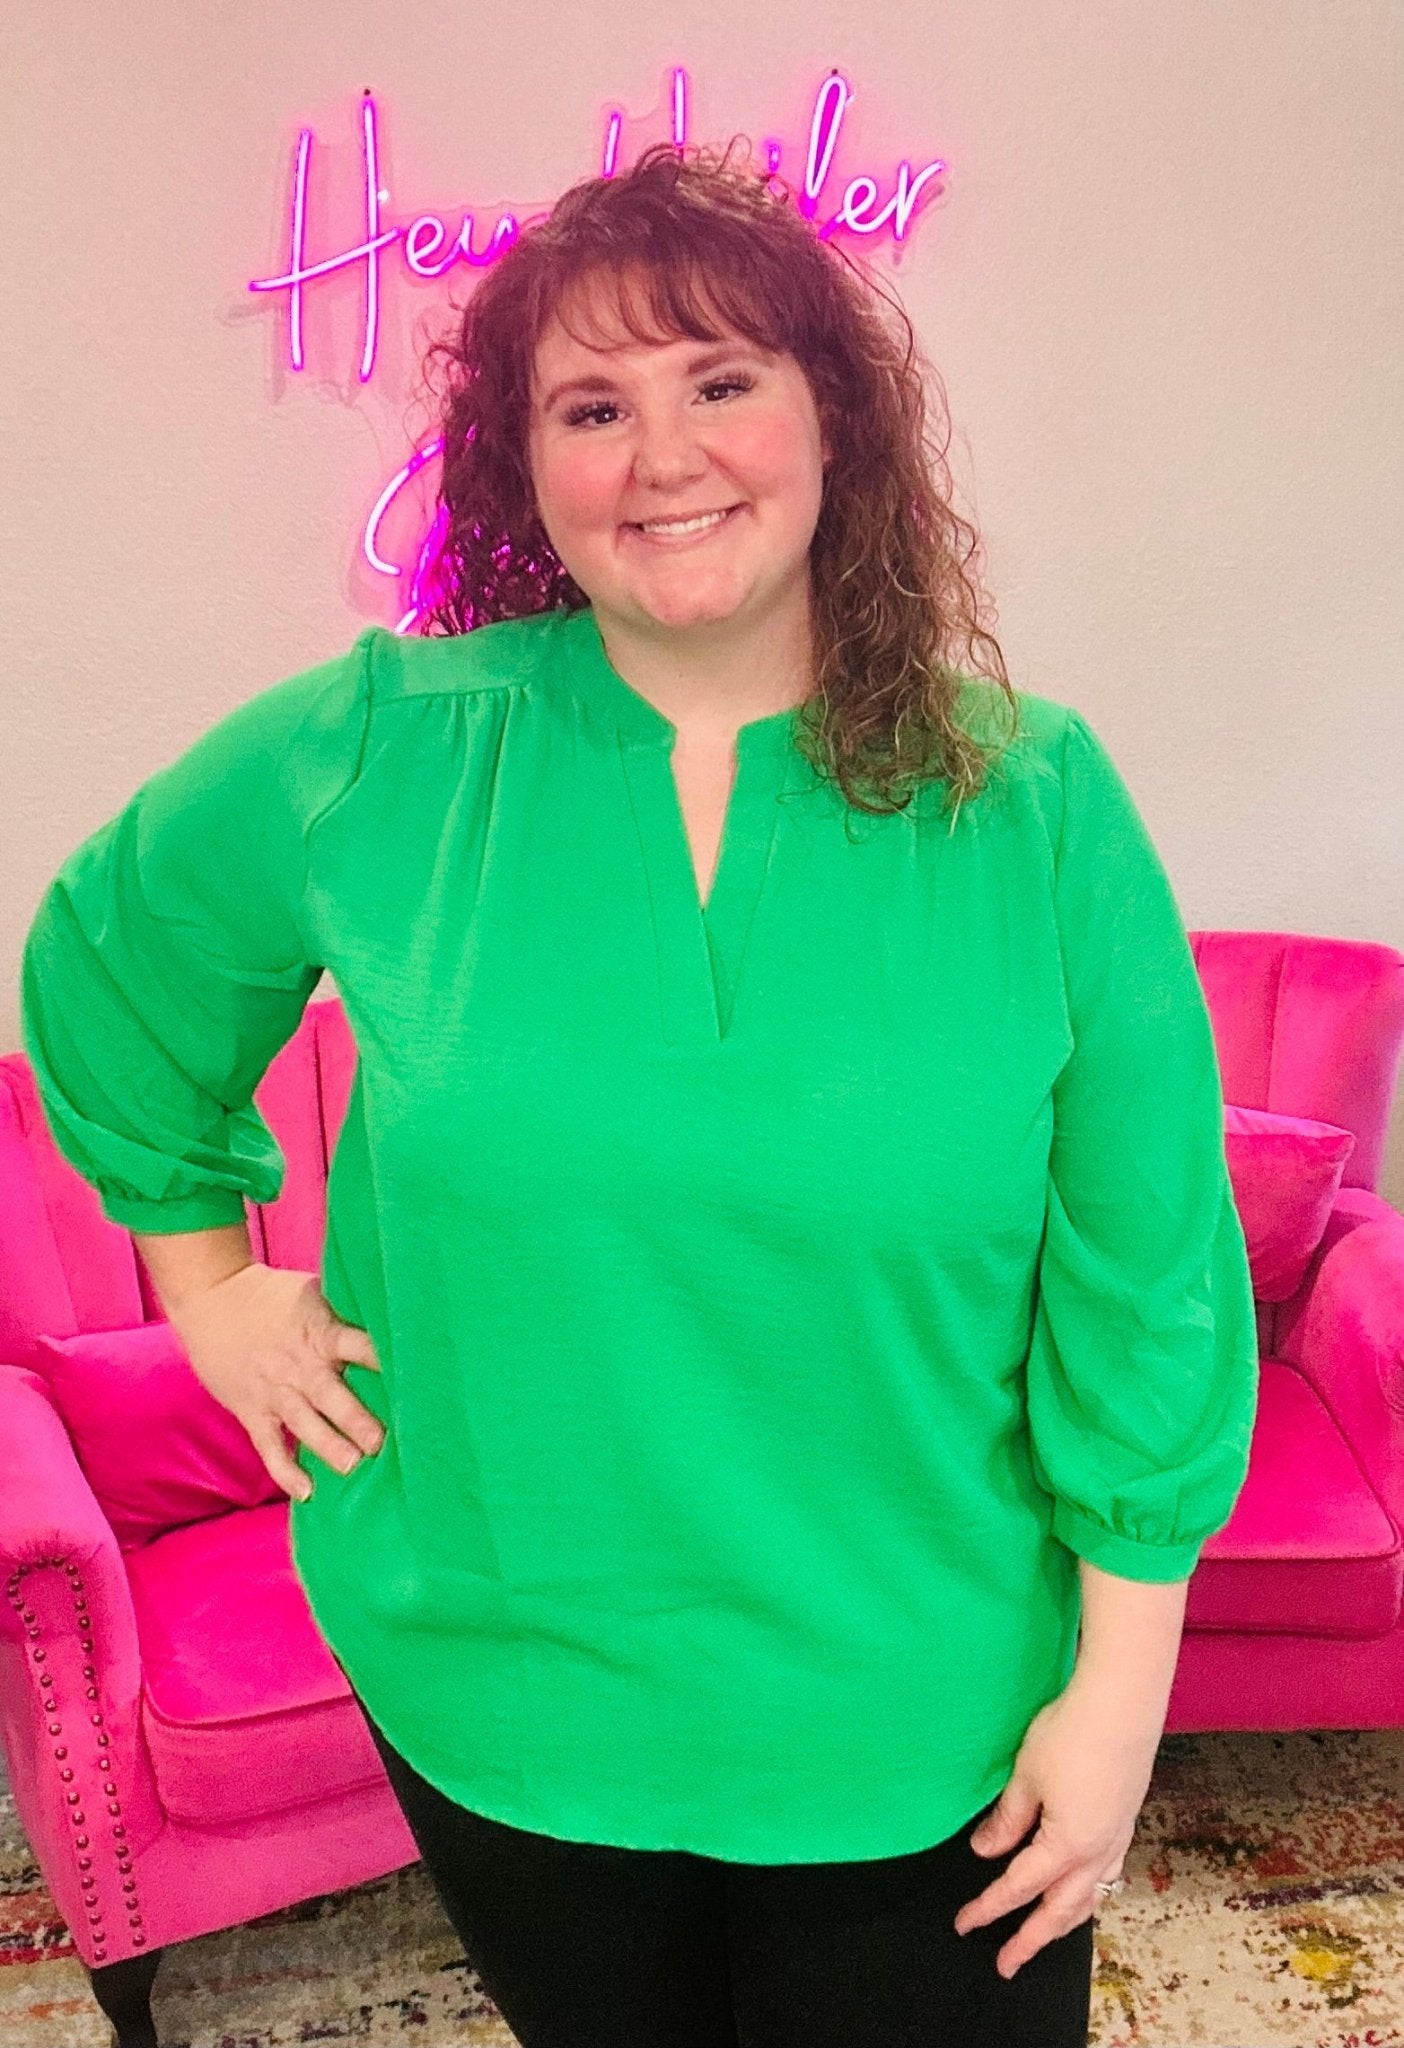 The Beth Top - Hey Heifer Boutique